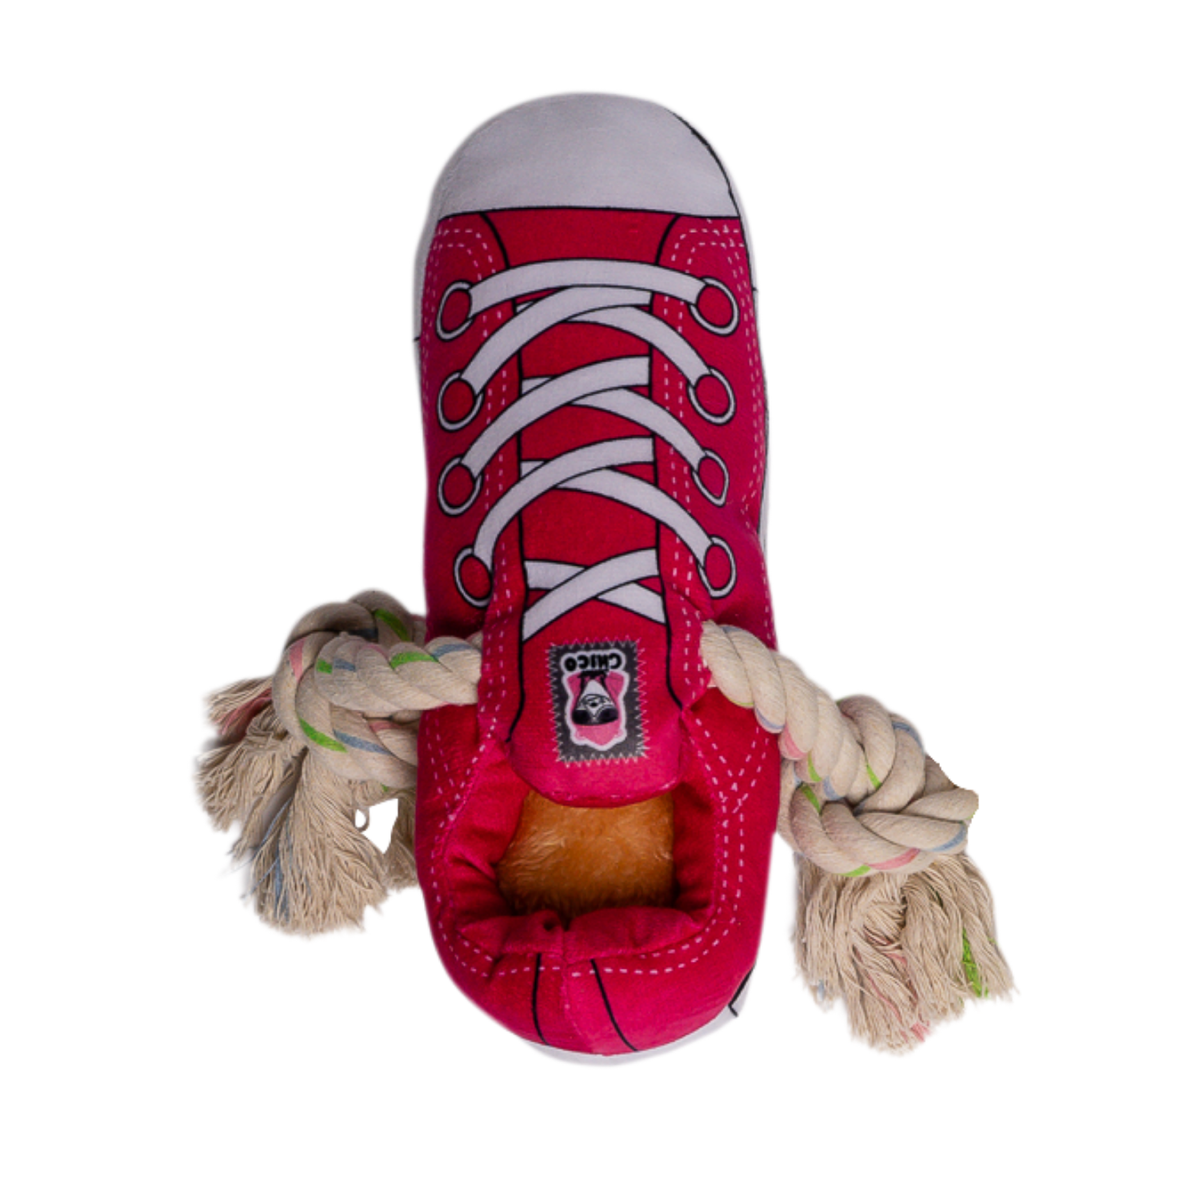 Squeaking Comfort Plush Sneaker Dog Toy - Pink by American Pet Supplies